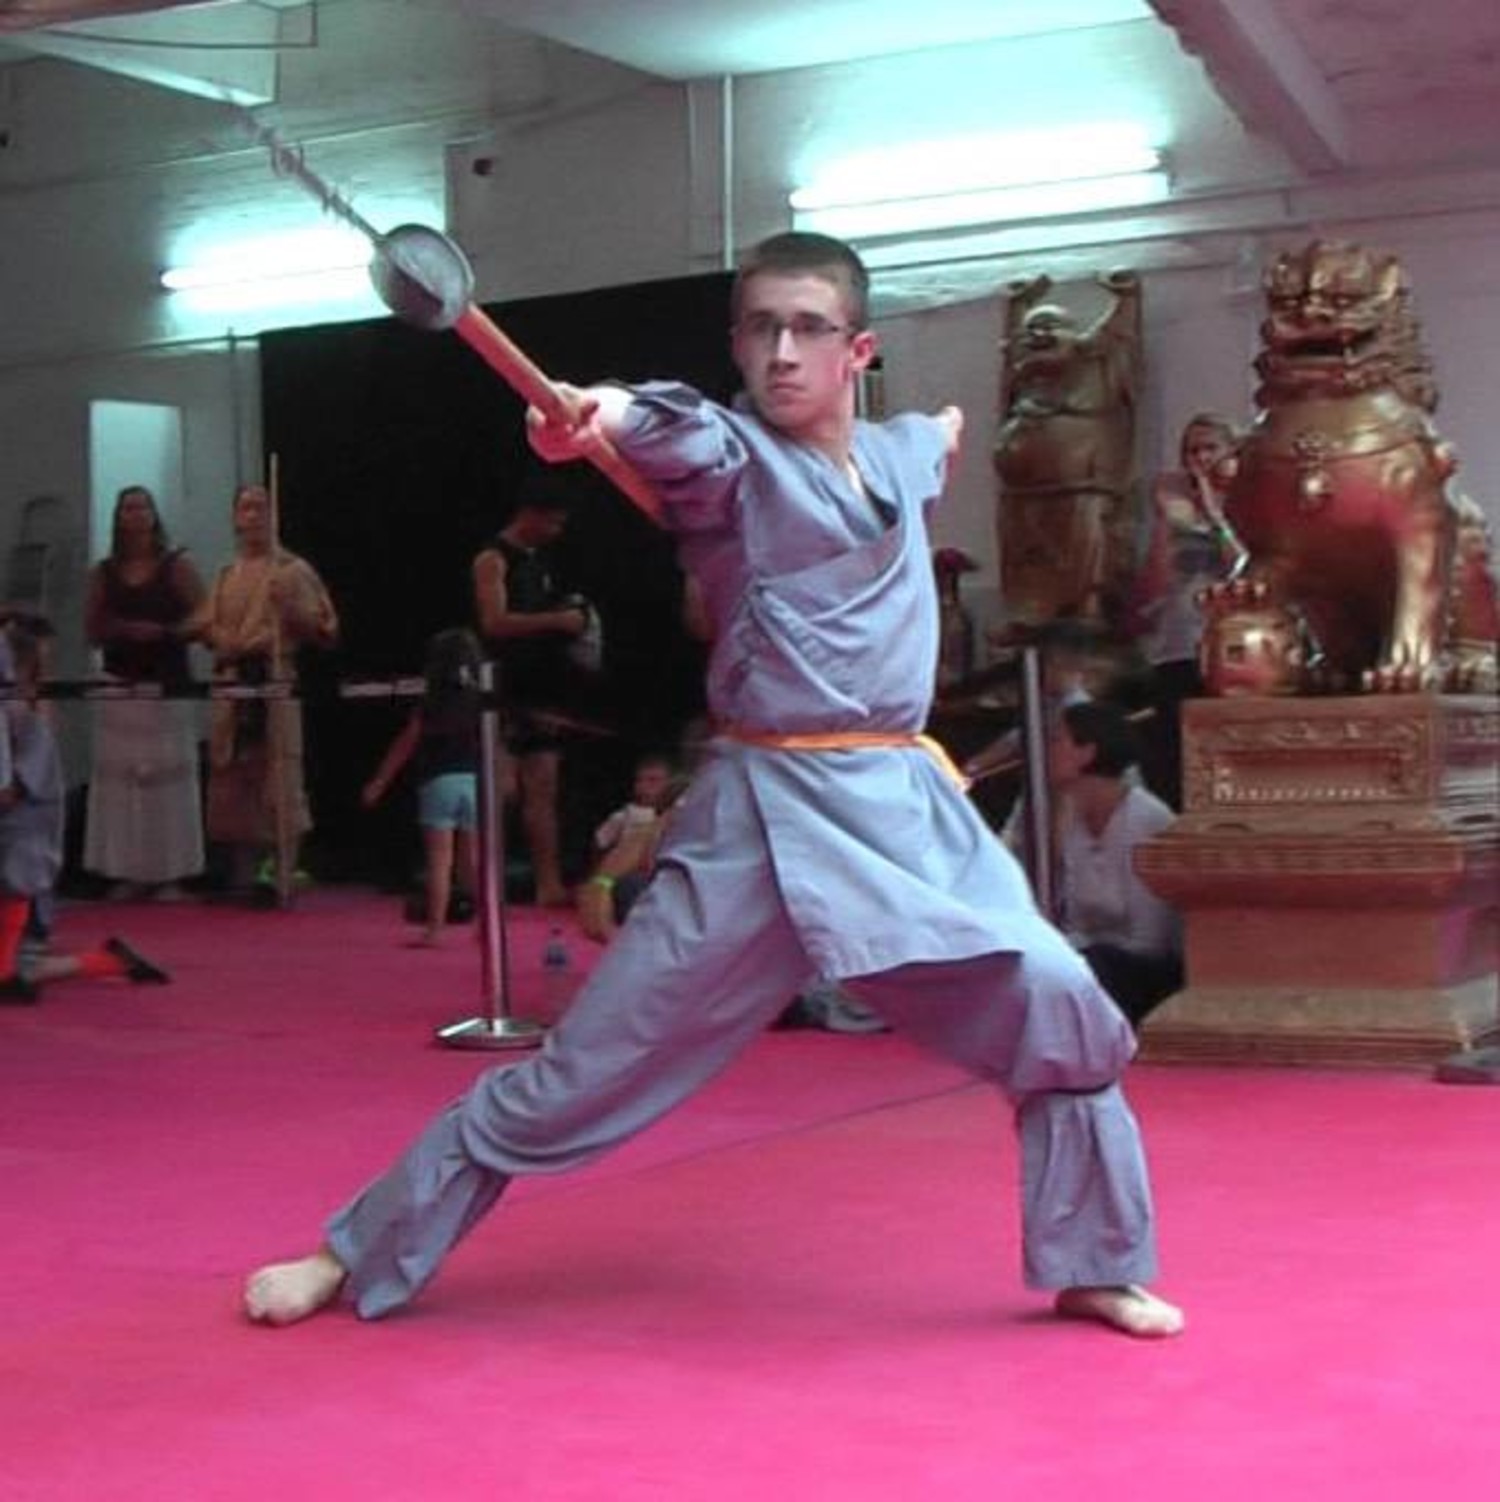 Grey Shaolin Robes for sale for Shaolin Temple Kung Fu - Enso Martial Arts  Shop Bristol